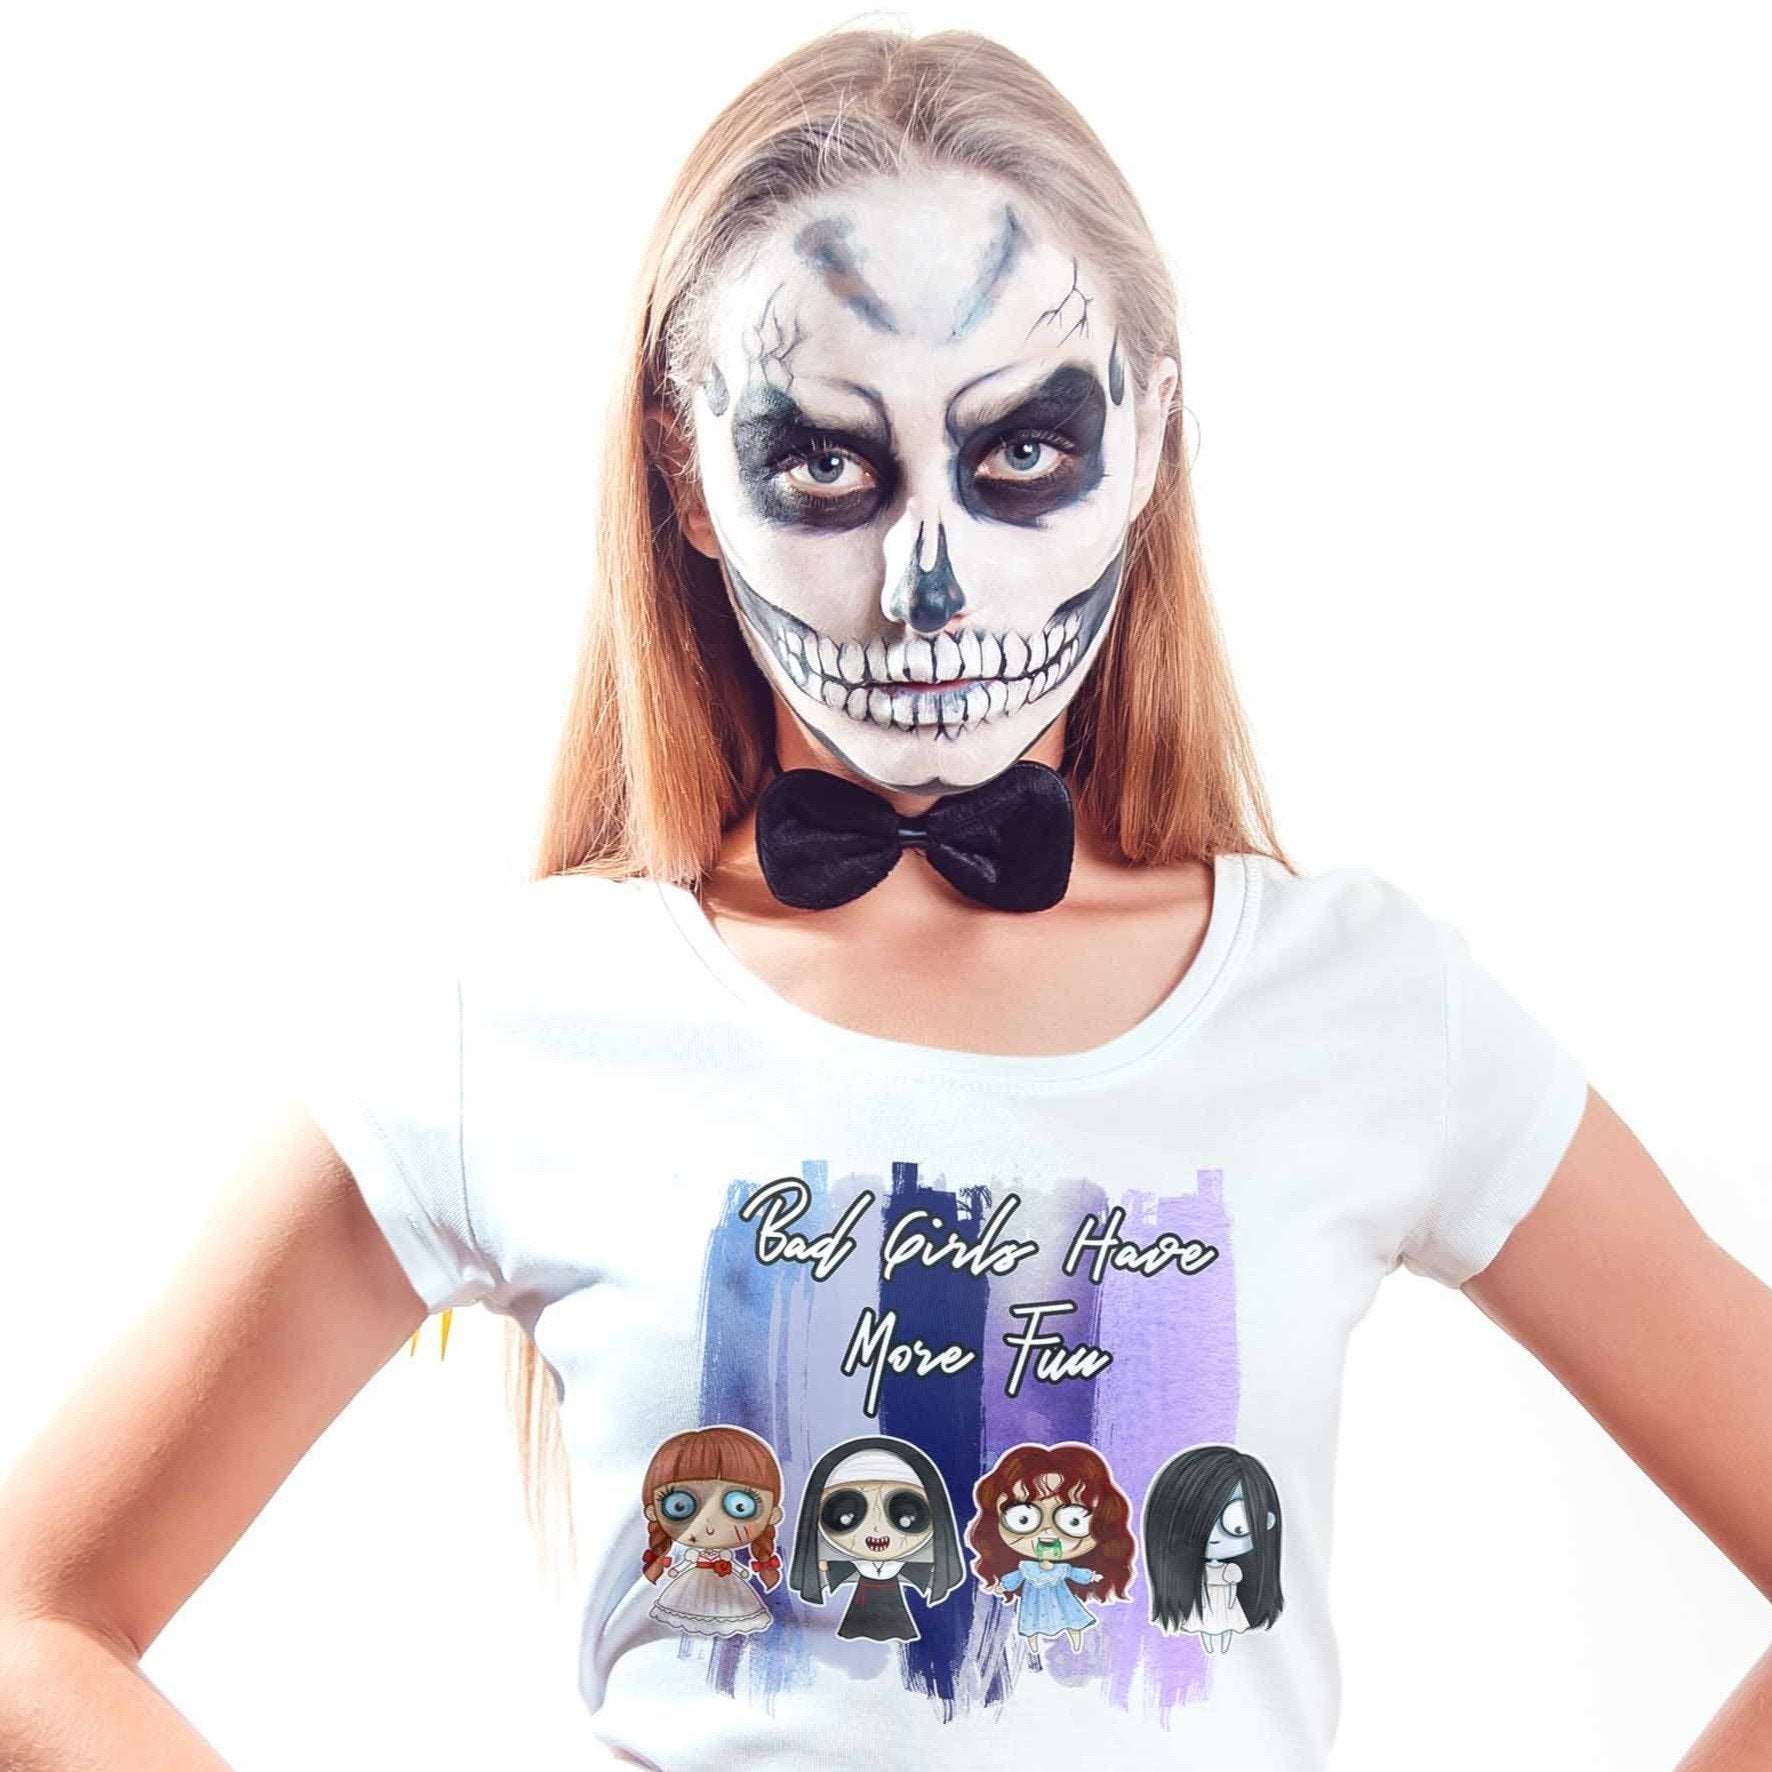 Bad Girls Have More Fun 2 Graphic Tee - My Custom Tee Party